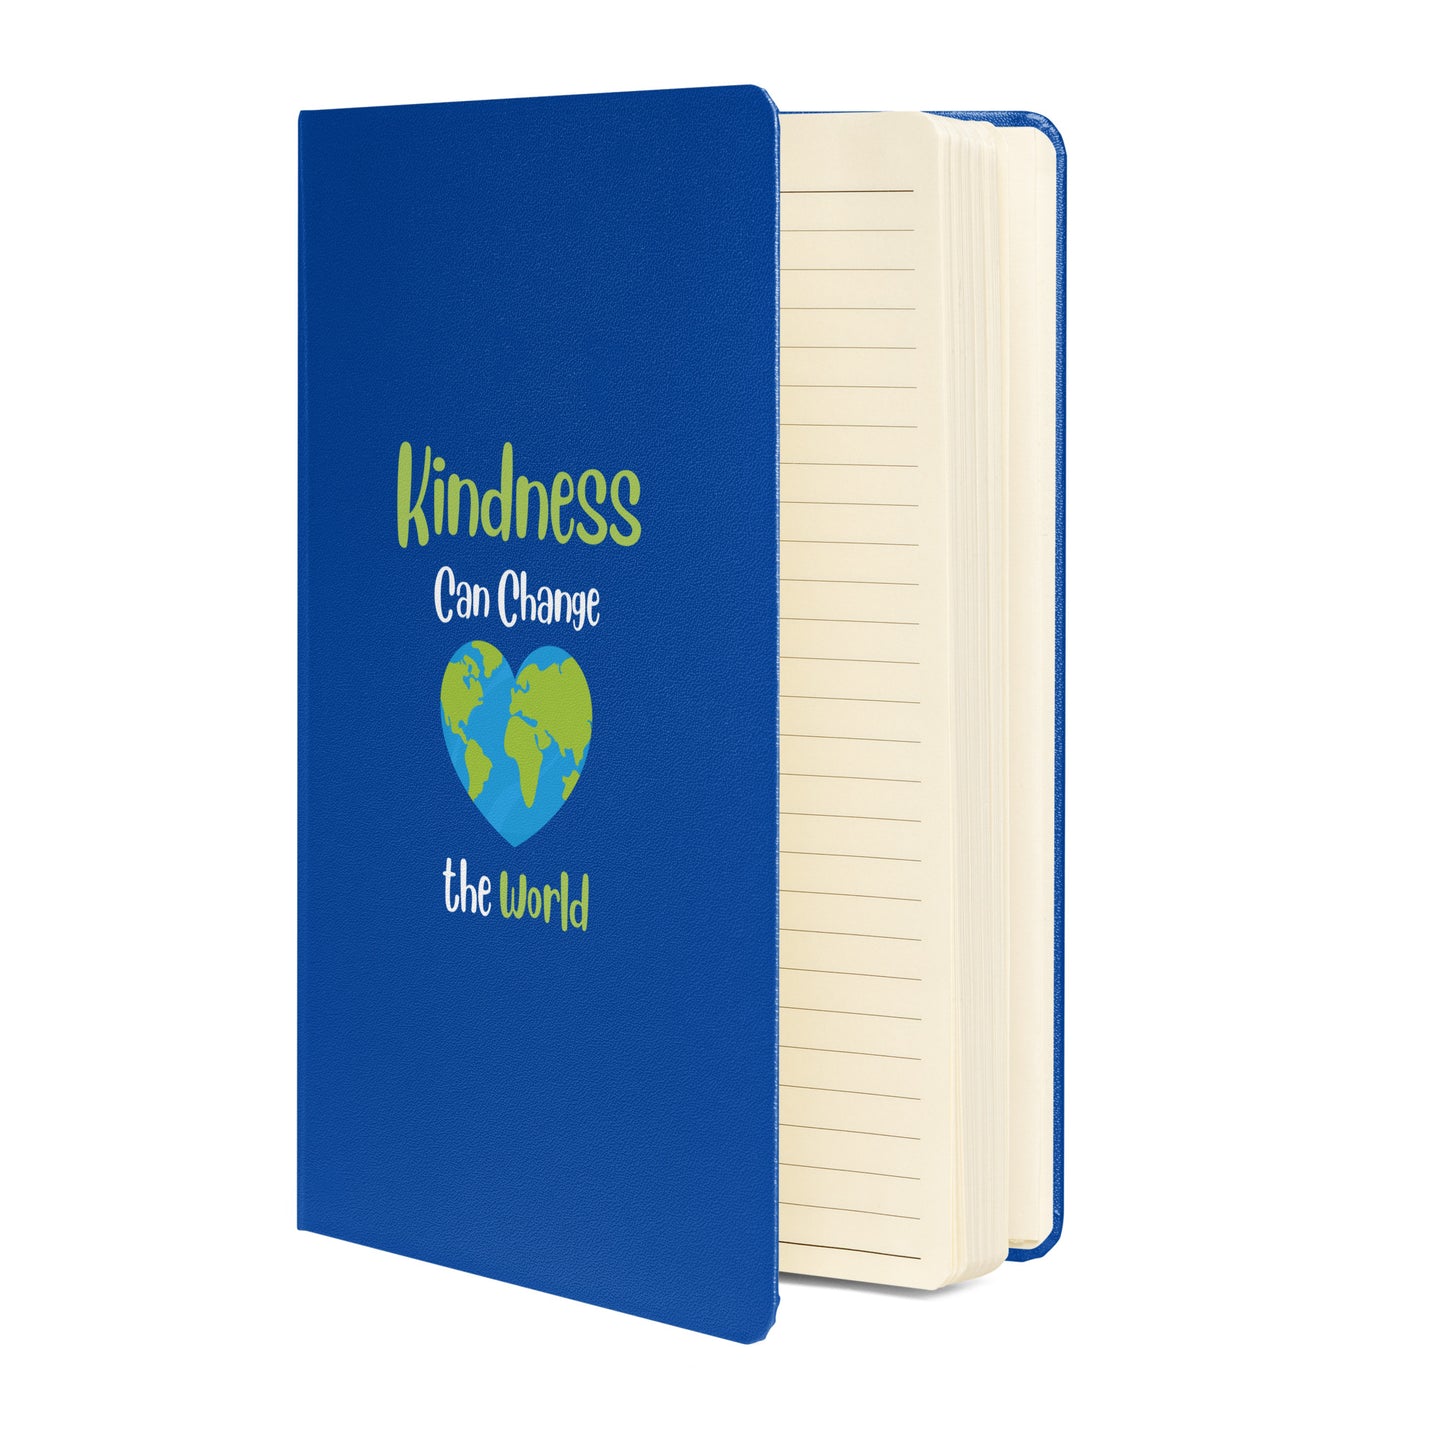 Kindness Can Change the World Hardcover Bound Journal